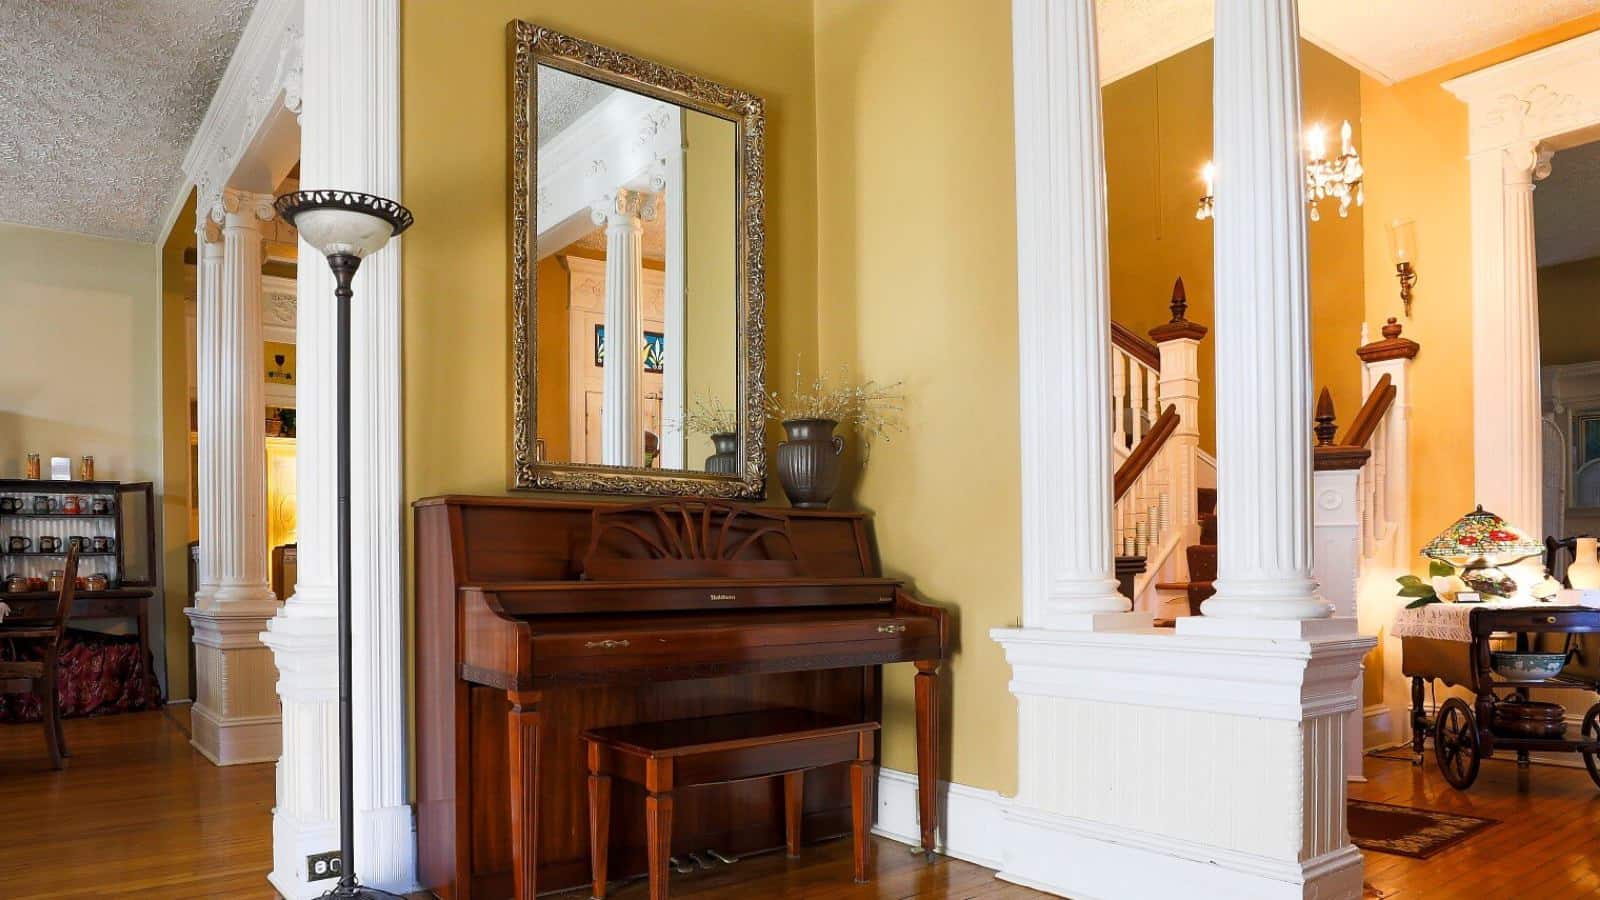 Front entry and living room with yellow walls, hardwood flooring, dark wooden upright piano, and white spindle staircase with dark wooden rails